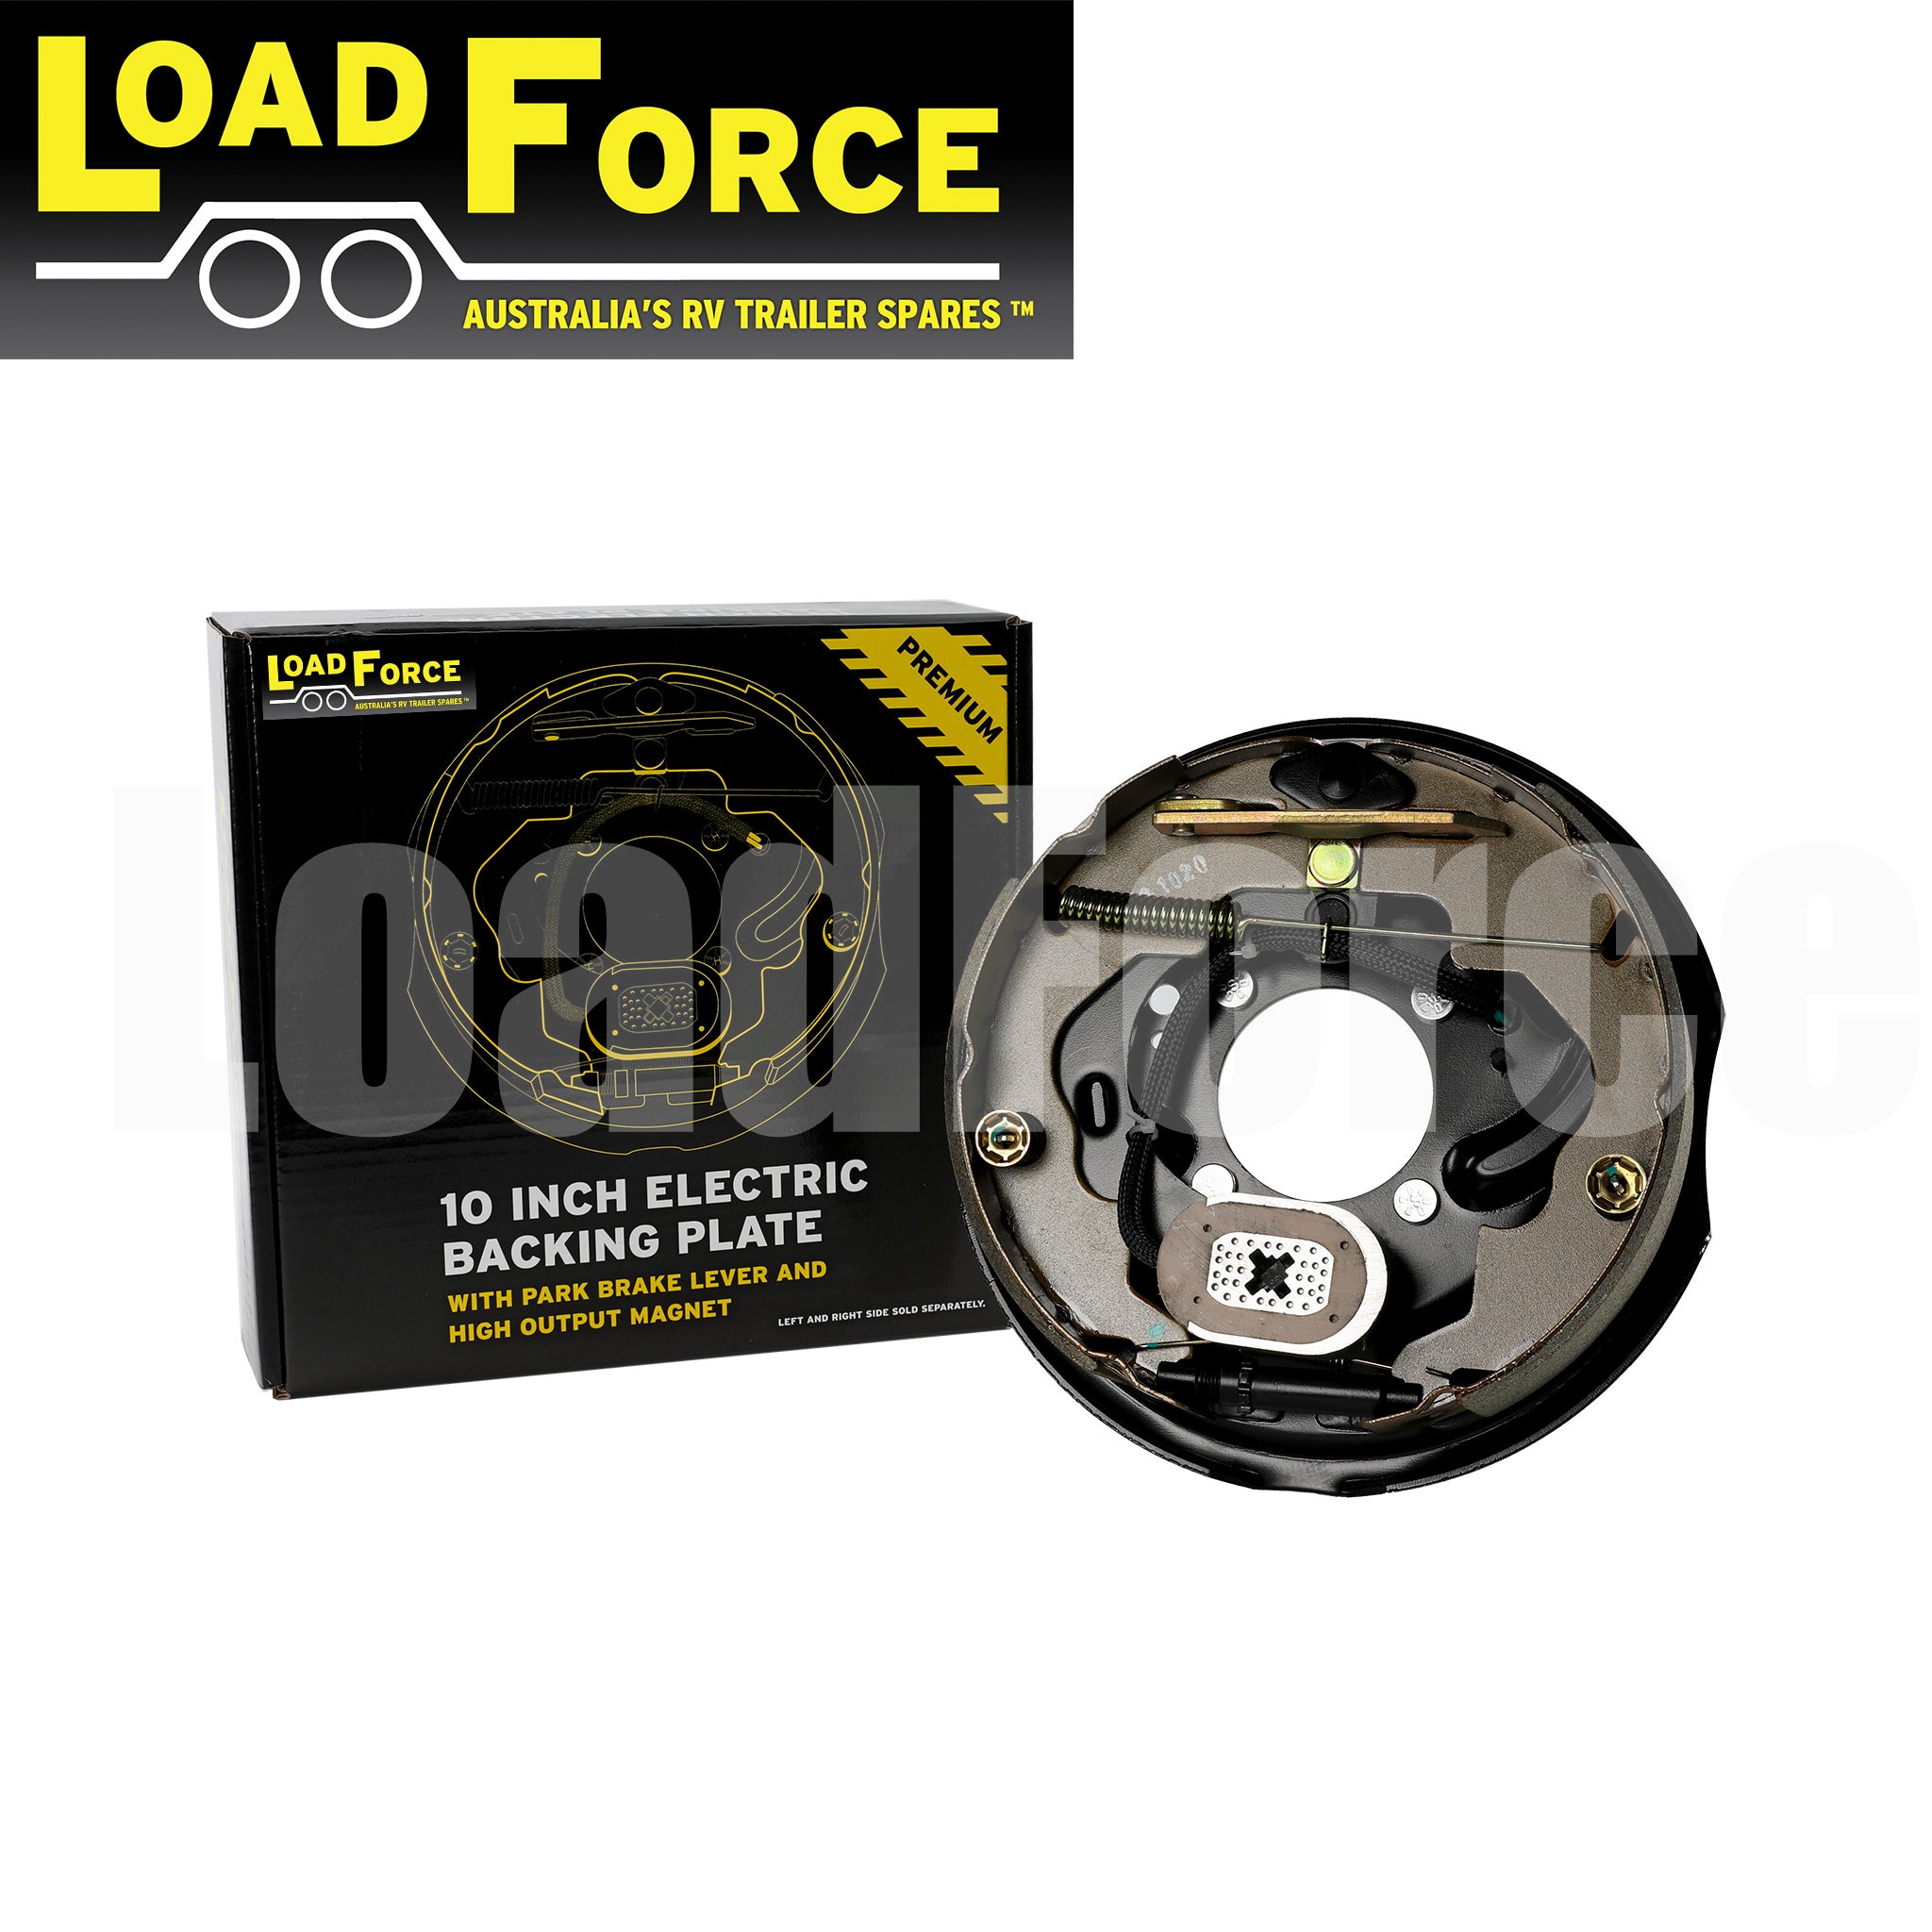 LoadForce 10 inch left hand electric backing plate assembly with park brake